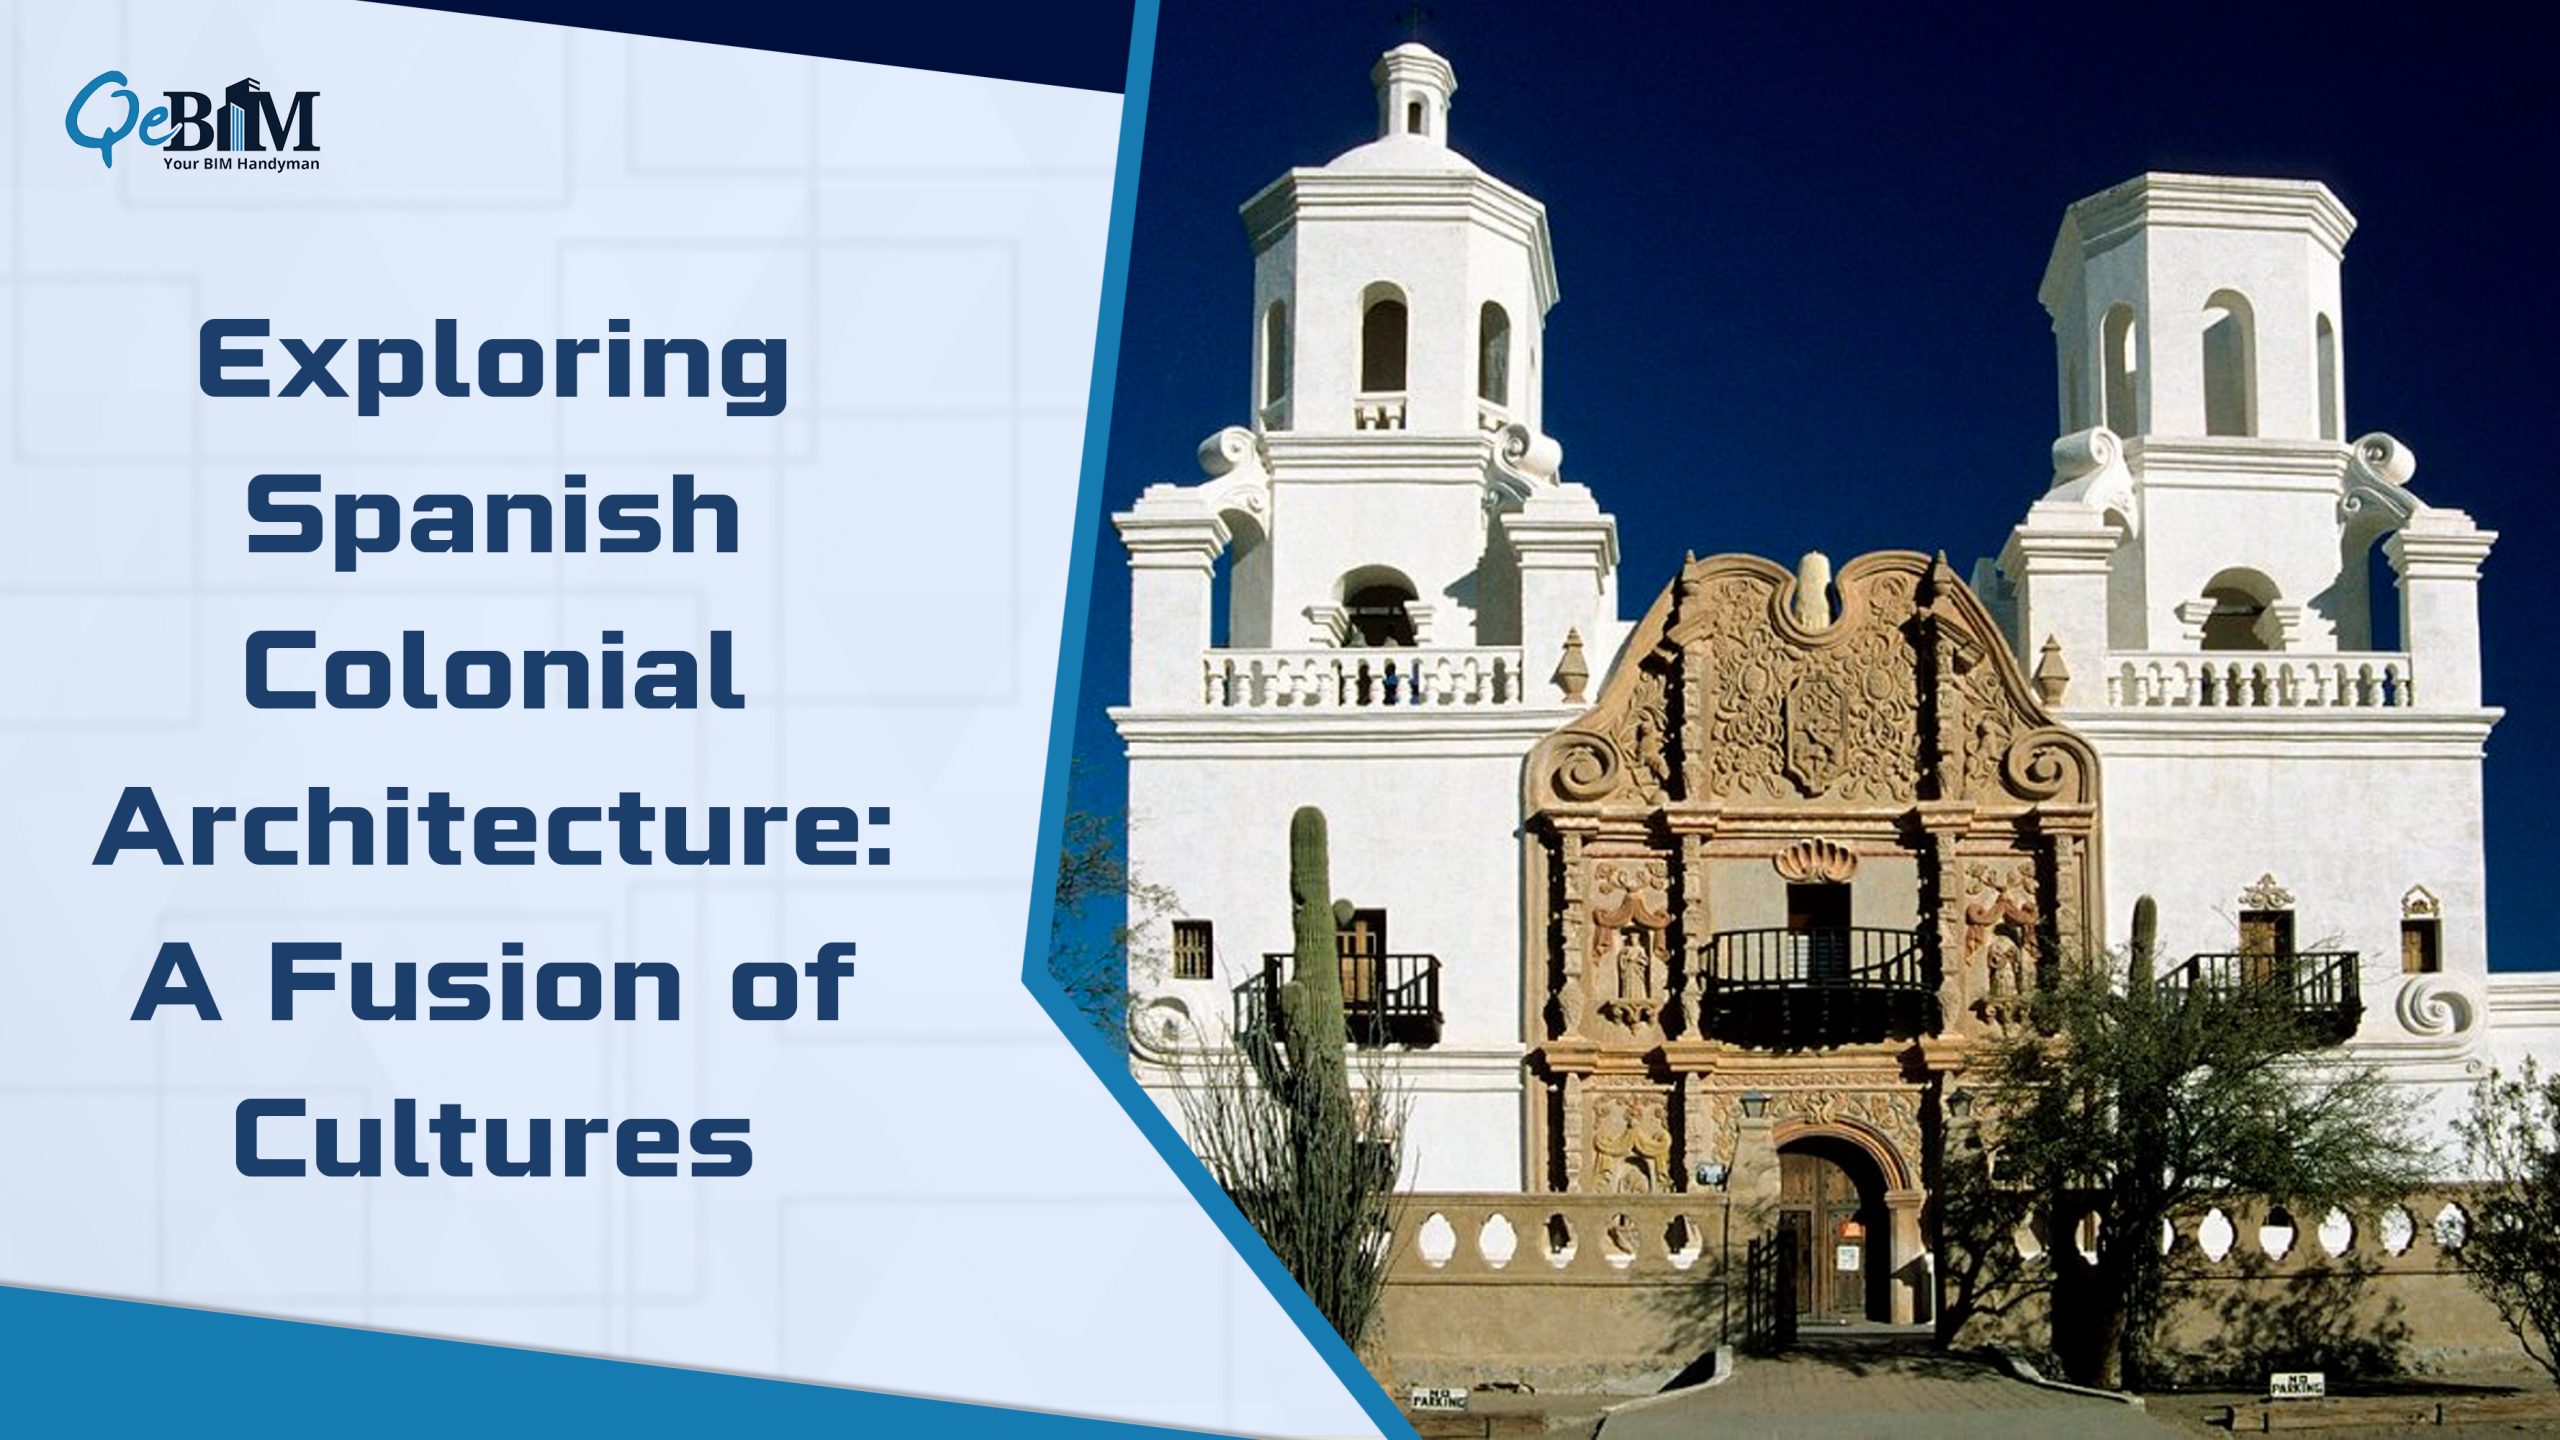 Exploring Spanish Colonial Architecture: A Fusion of Cultures